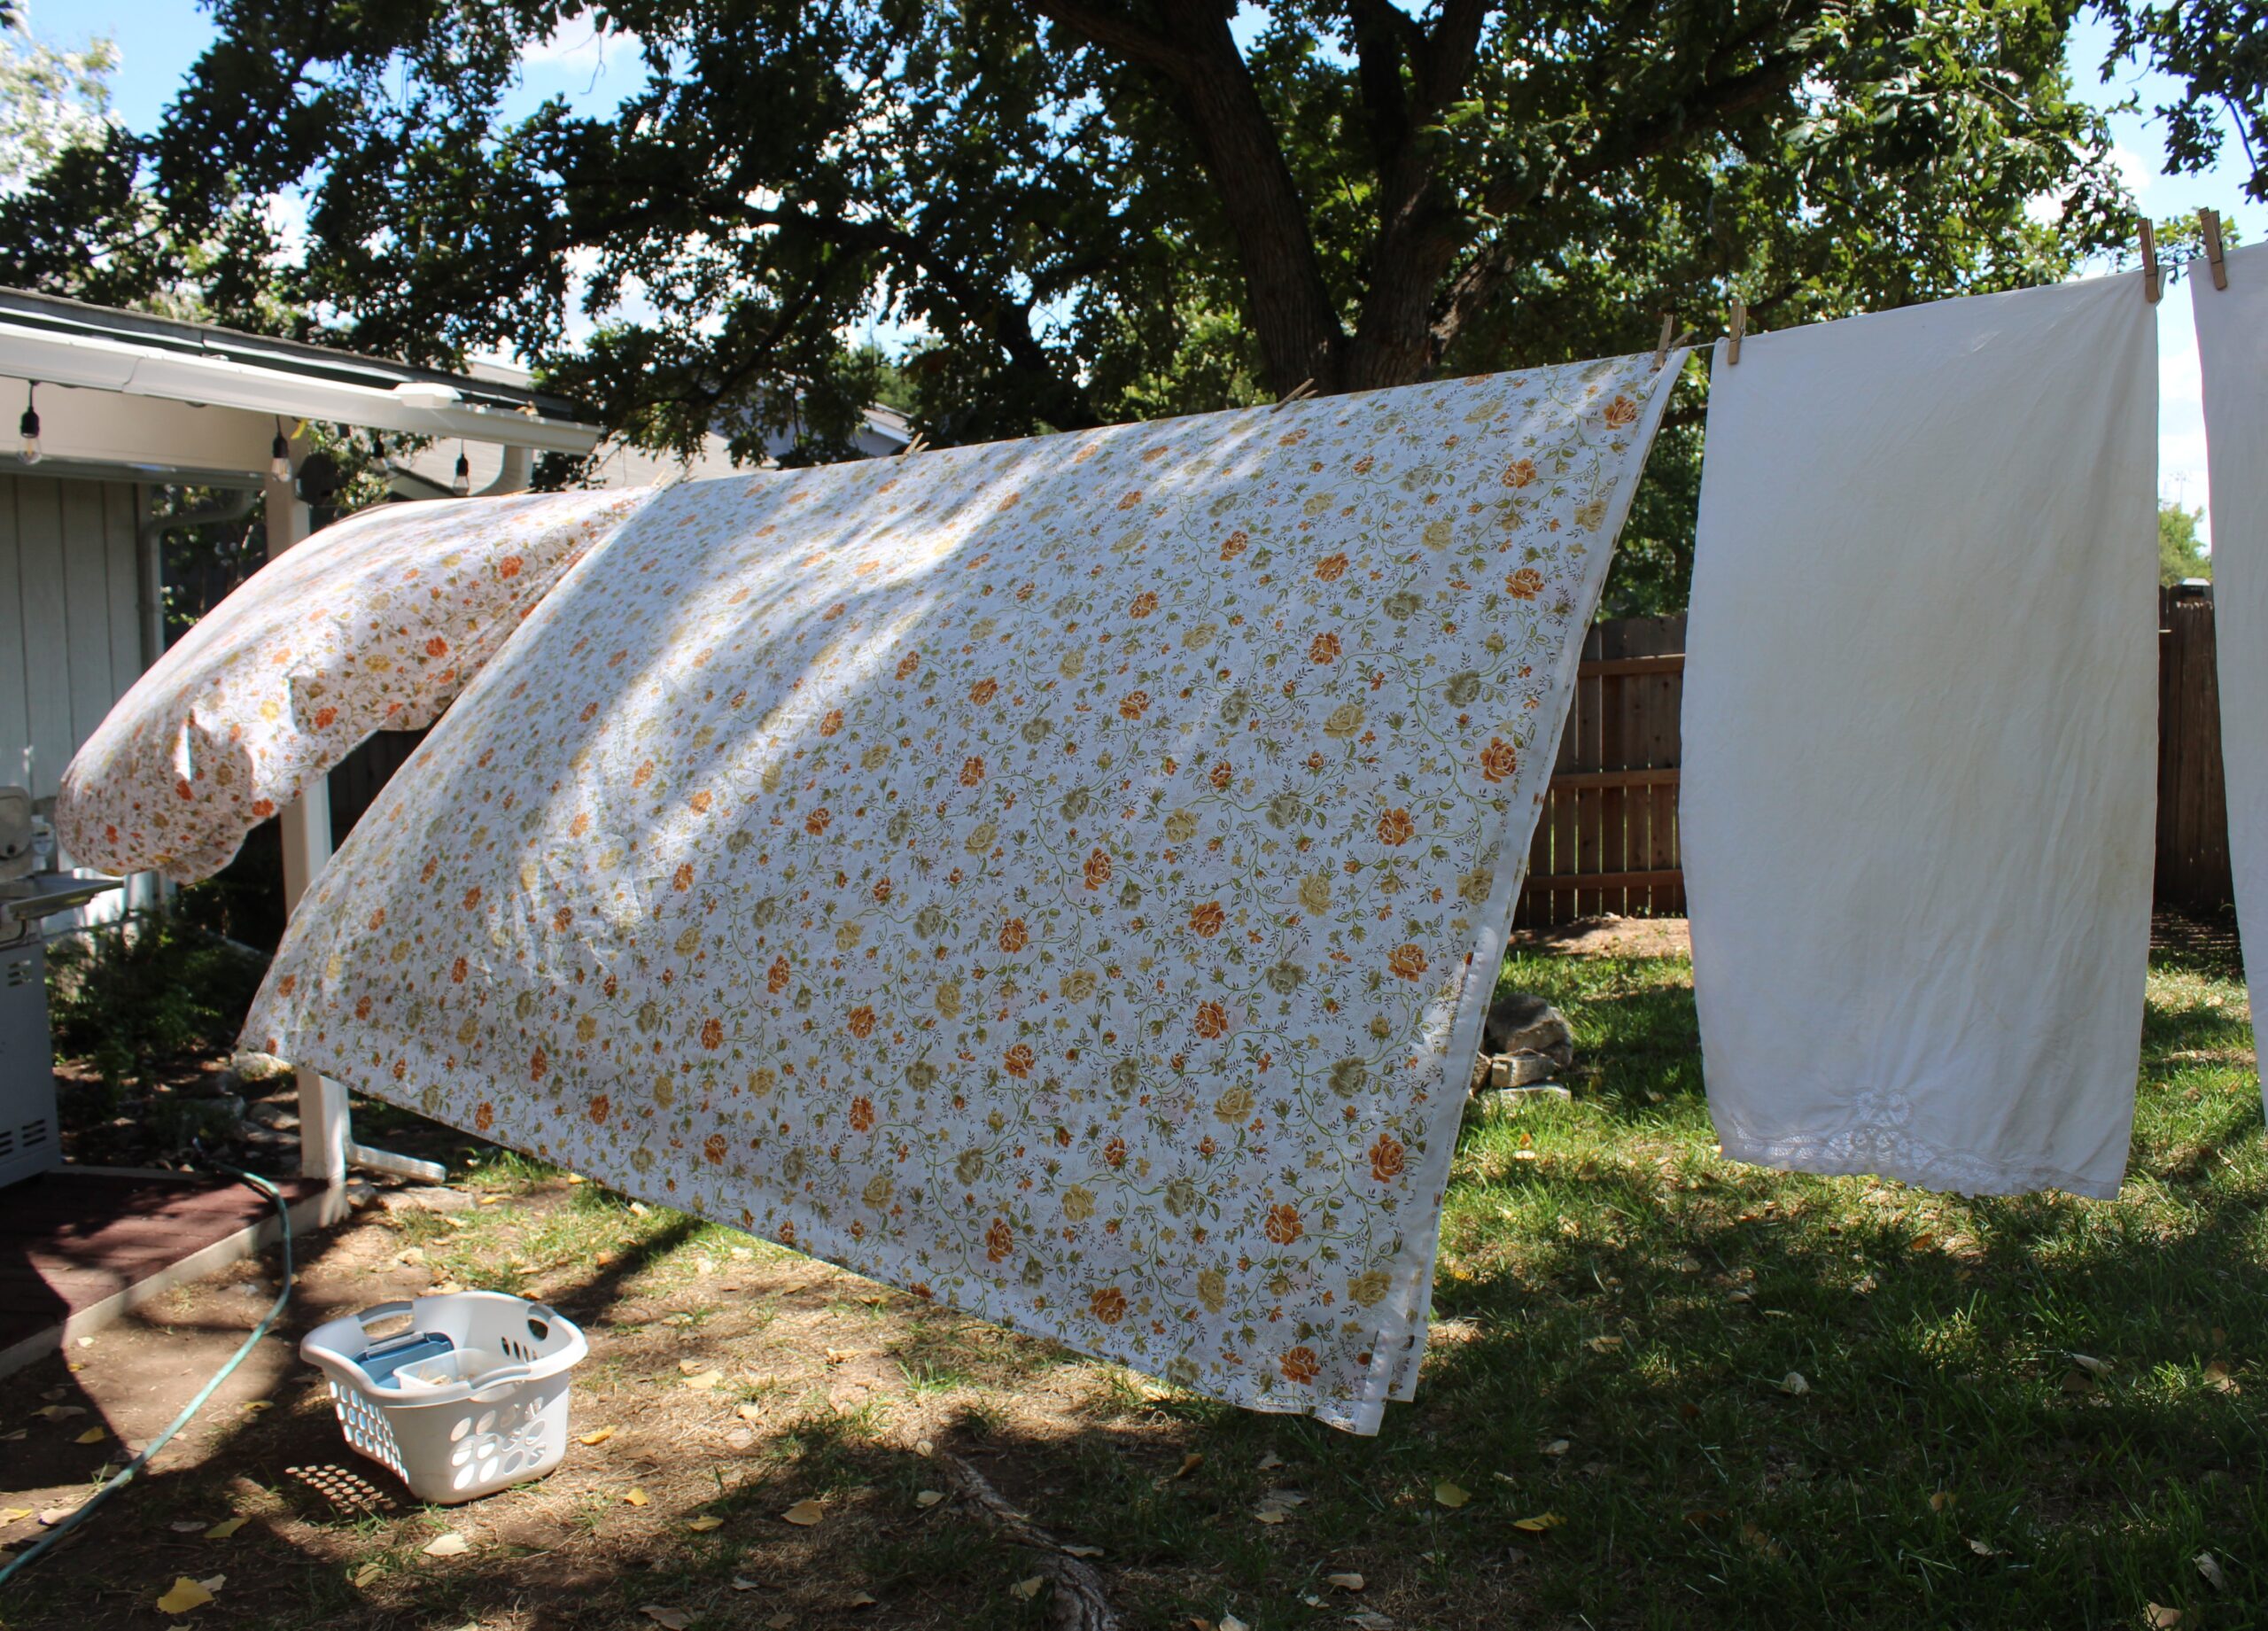 sheets drying on a clothesline